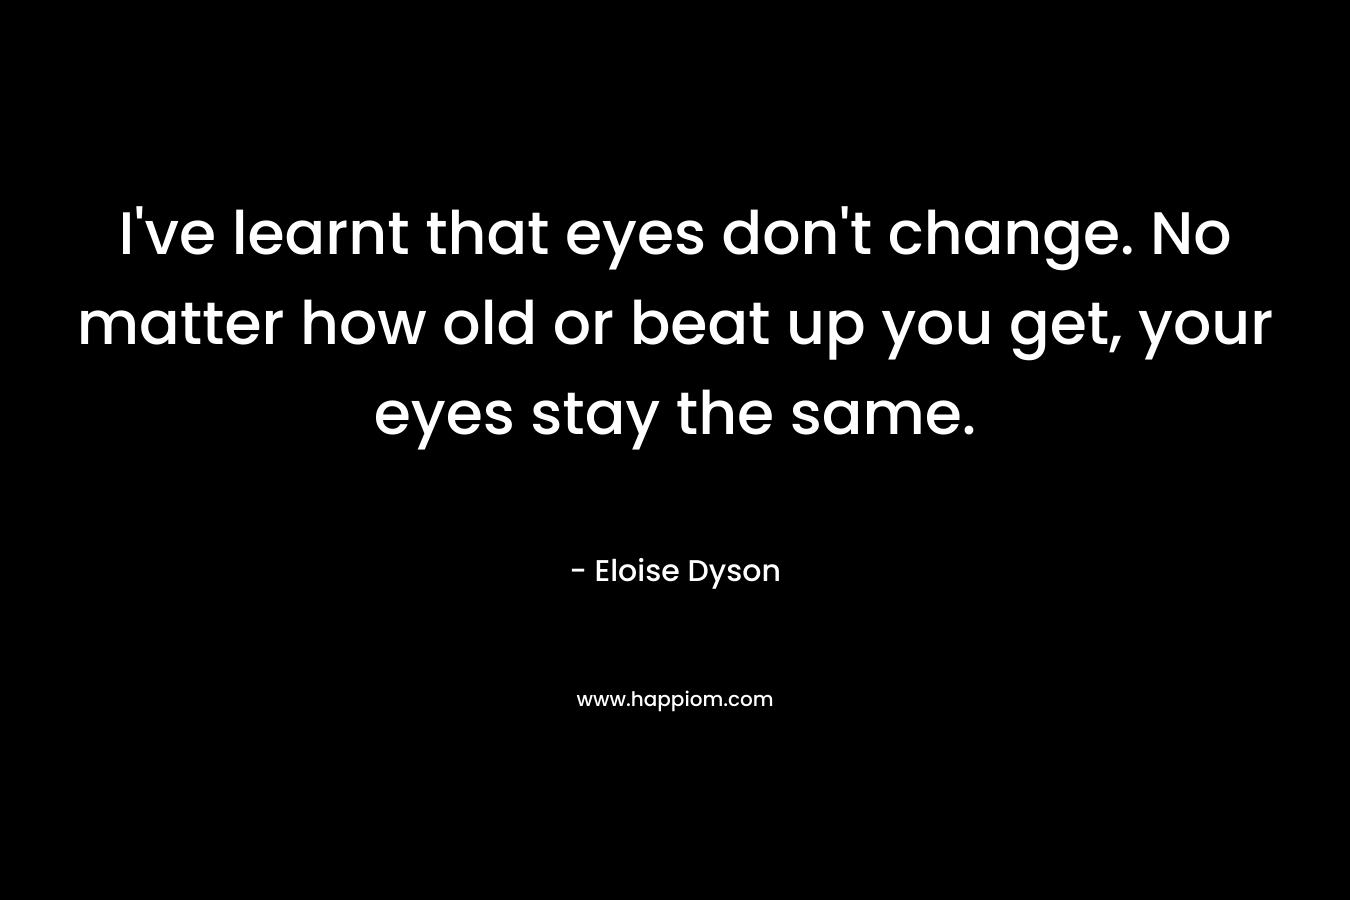 I’ve learnt that eyes don’t change. No matter how old or beat up you get, your eyes stay the same. – Eloise Dyson